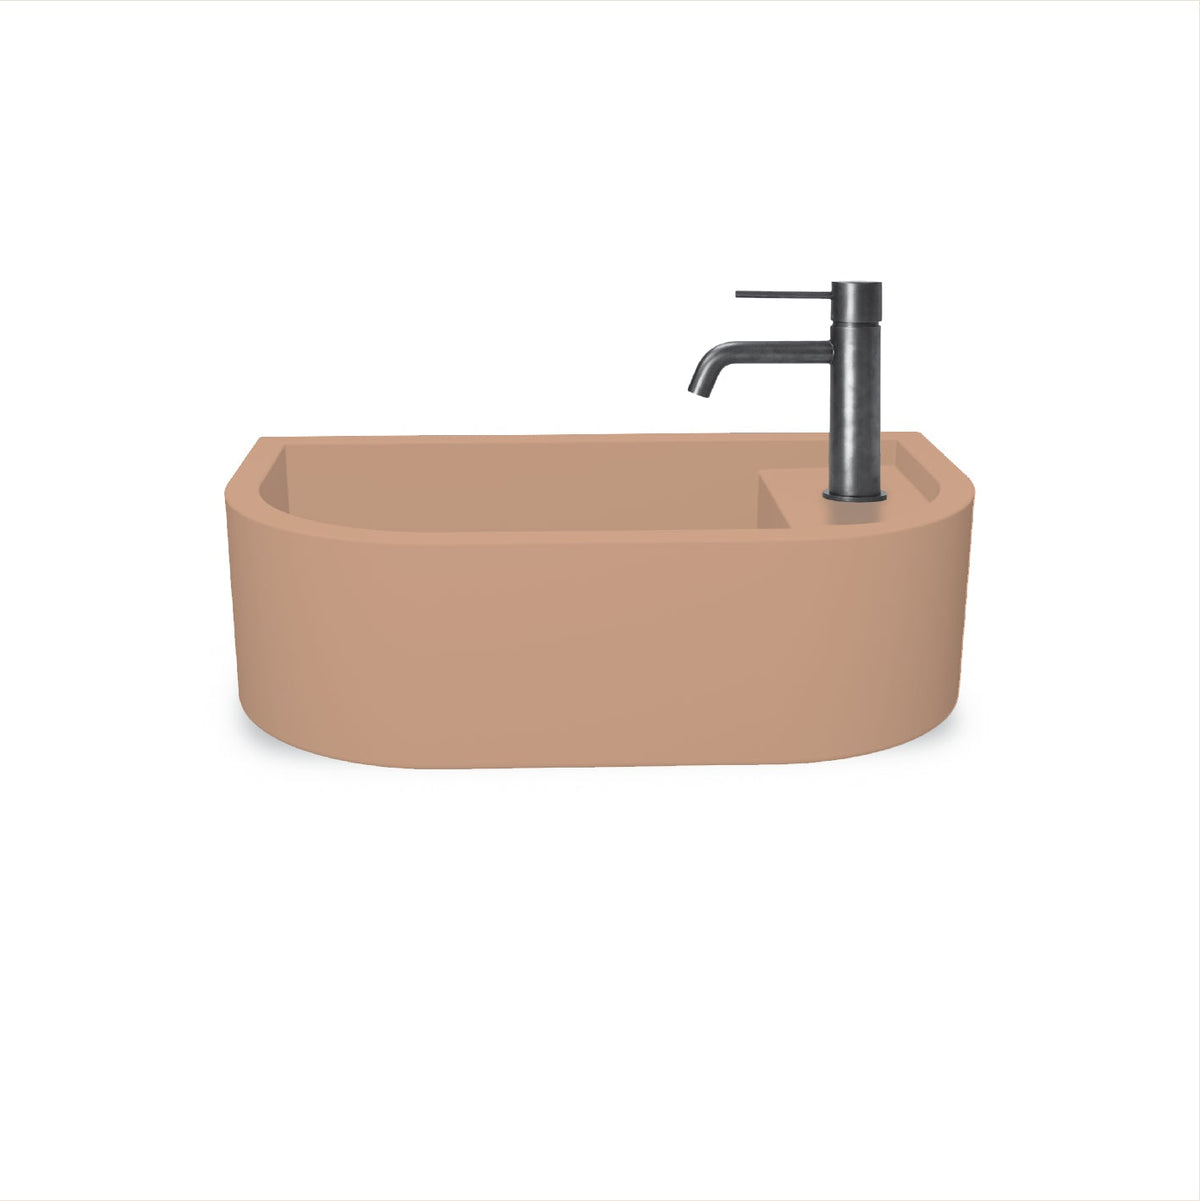 Loop 01 Basin - Overflow - Wall Hung (Pastel Peach,Tap Hole,Chrome)